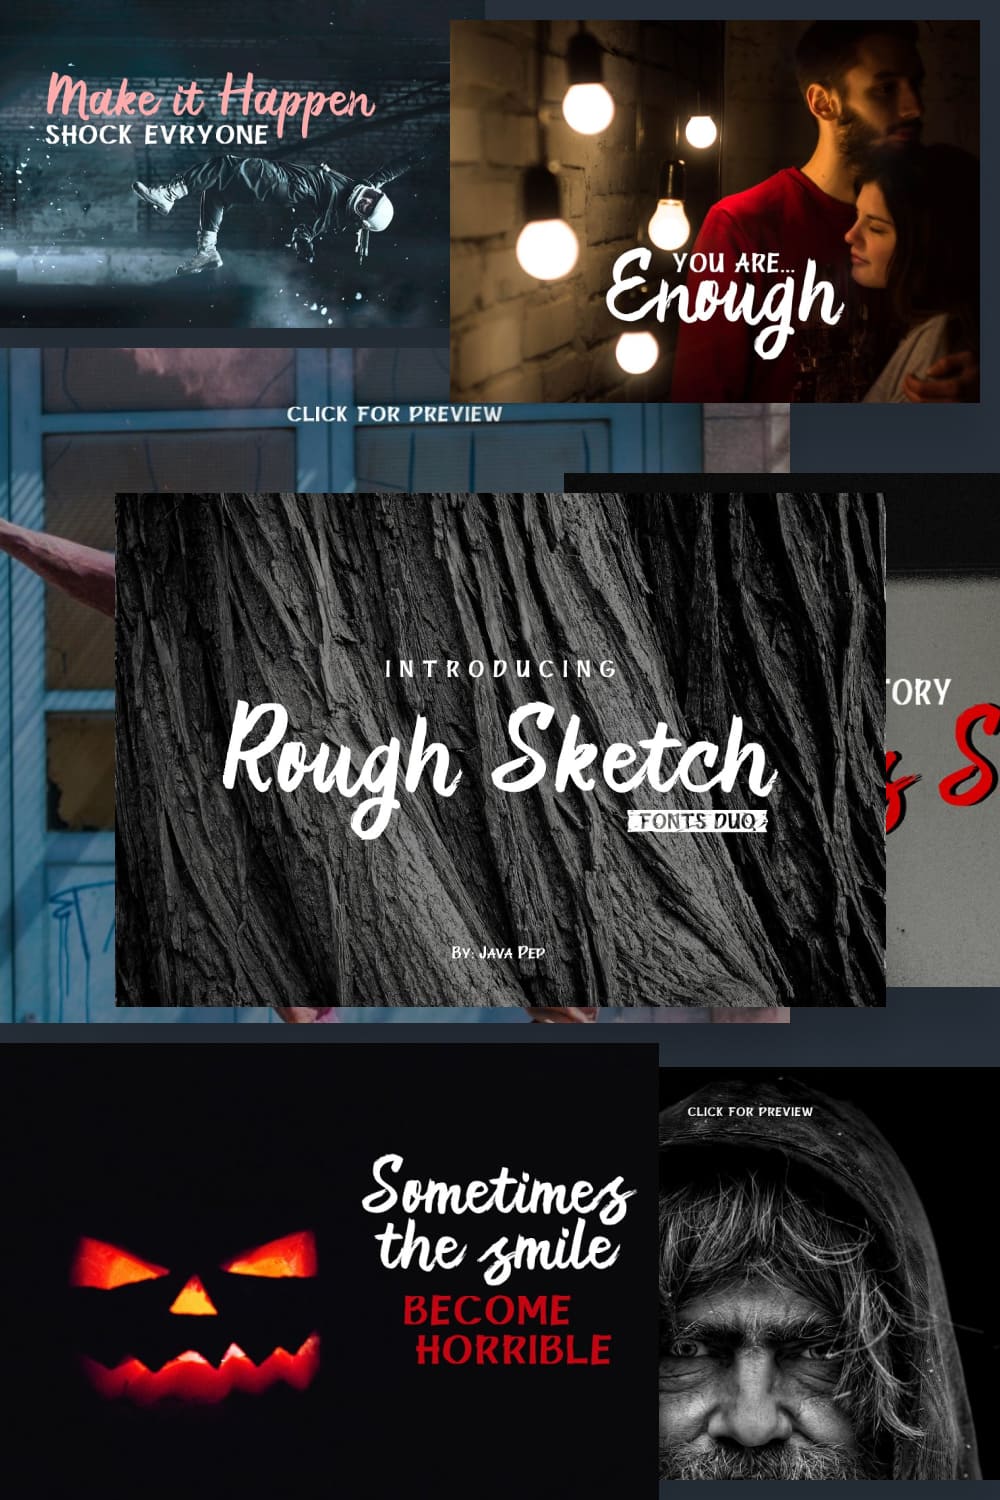 Rough Sketch is a unique font not like the regular font in commonly.